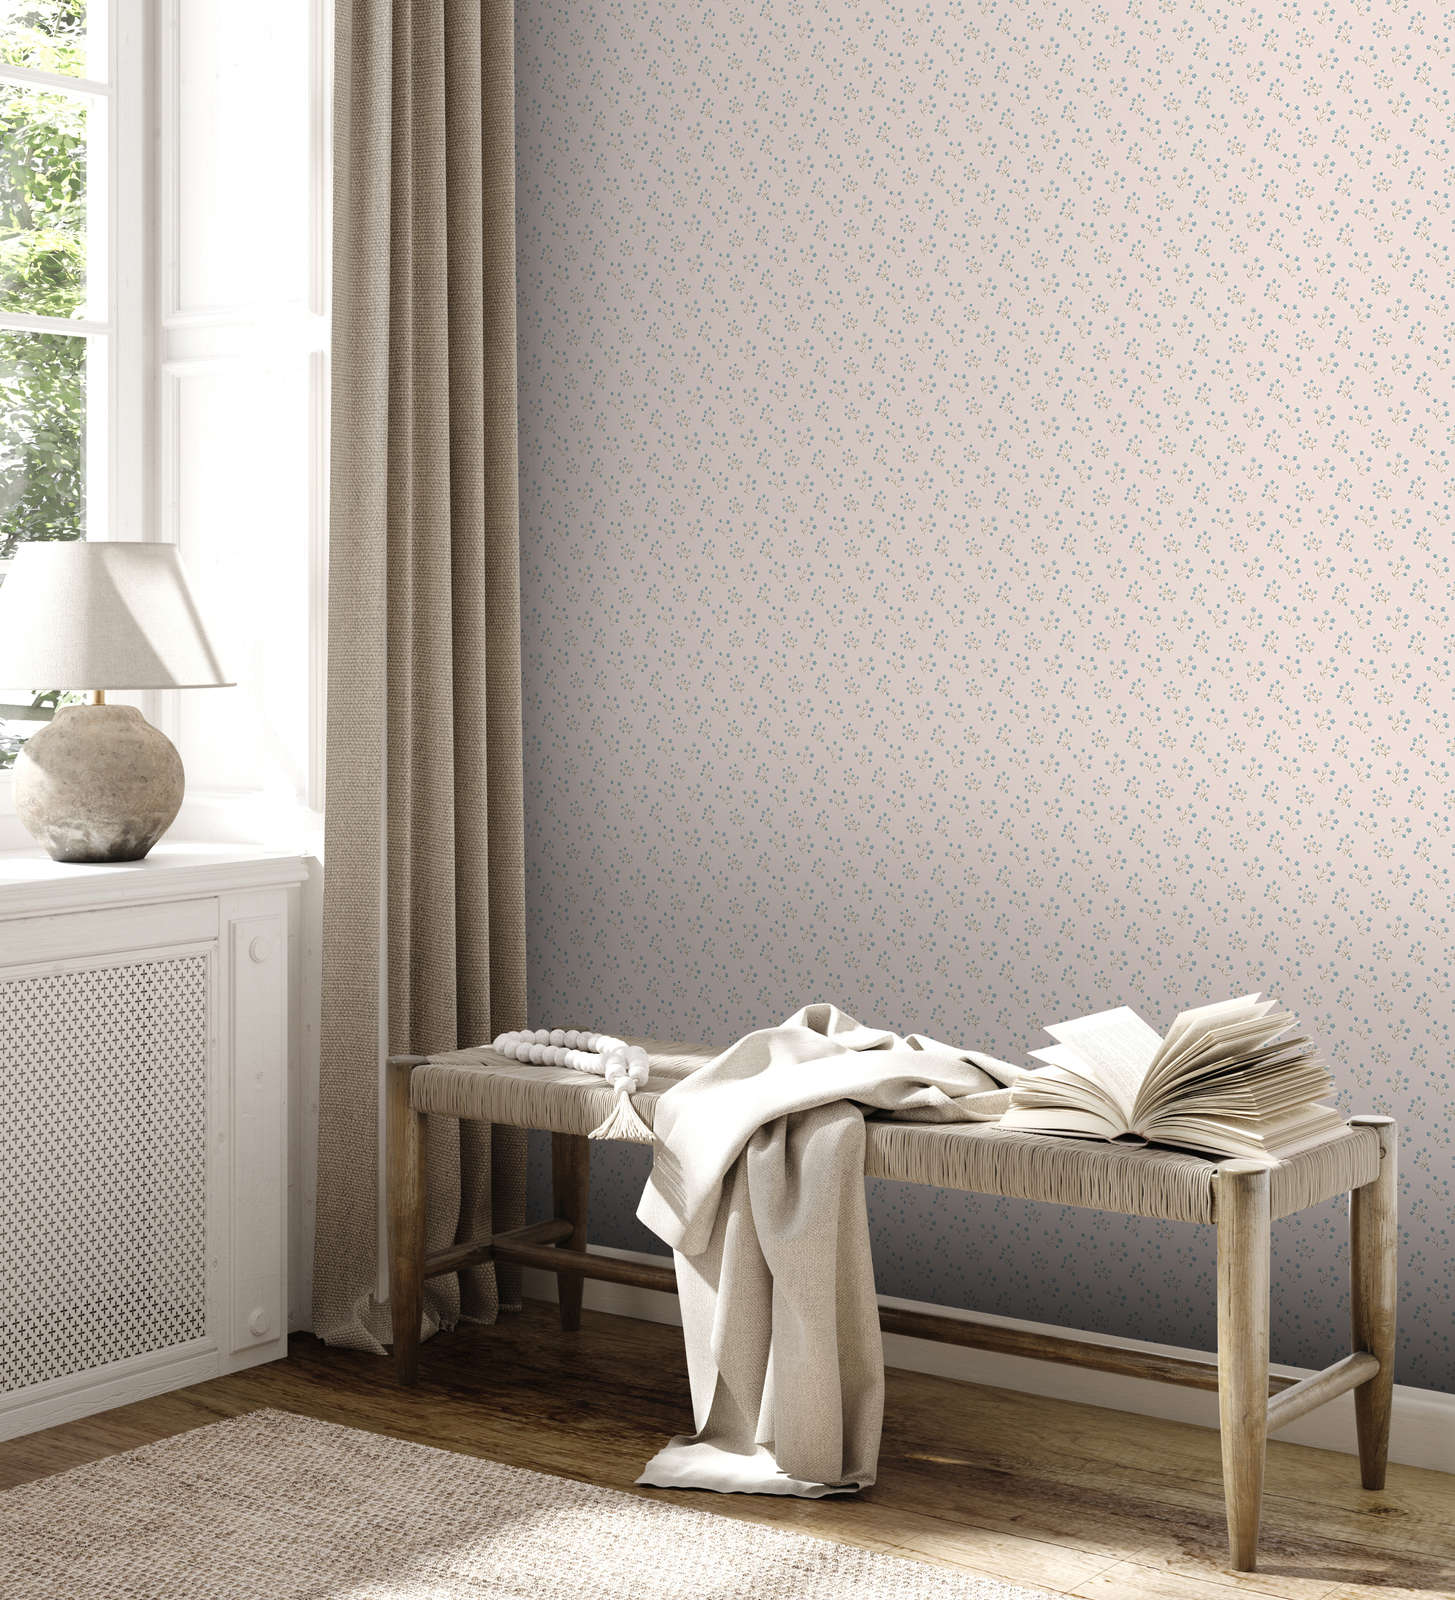             Floral wallpaper with small country house pattern - cream, blue, grey
        